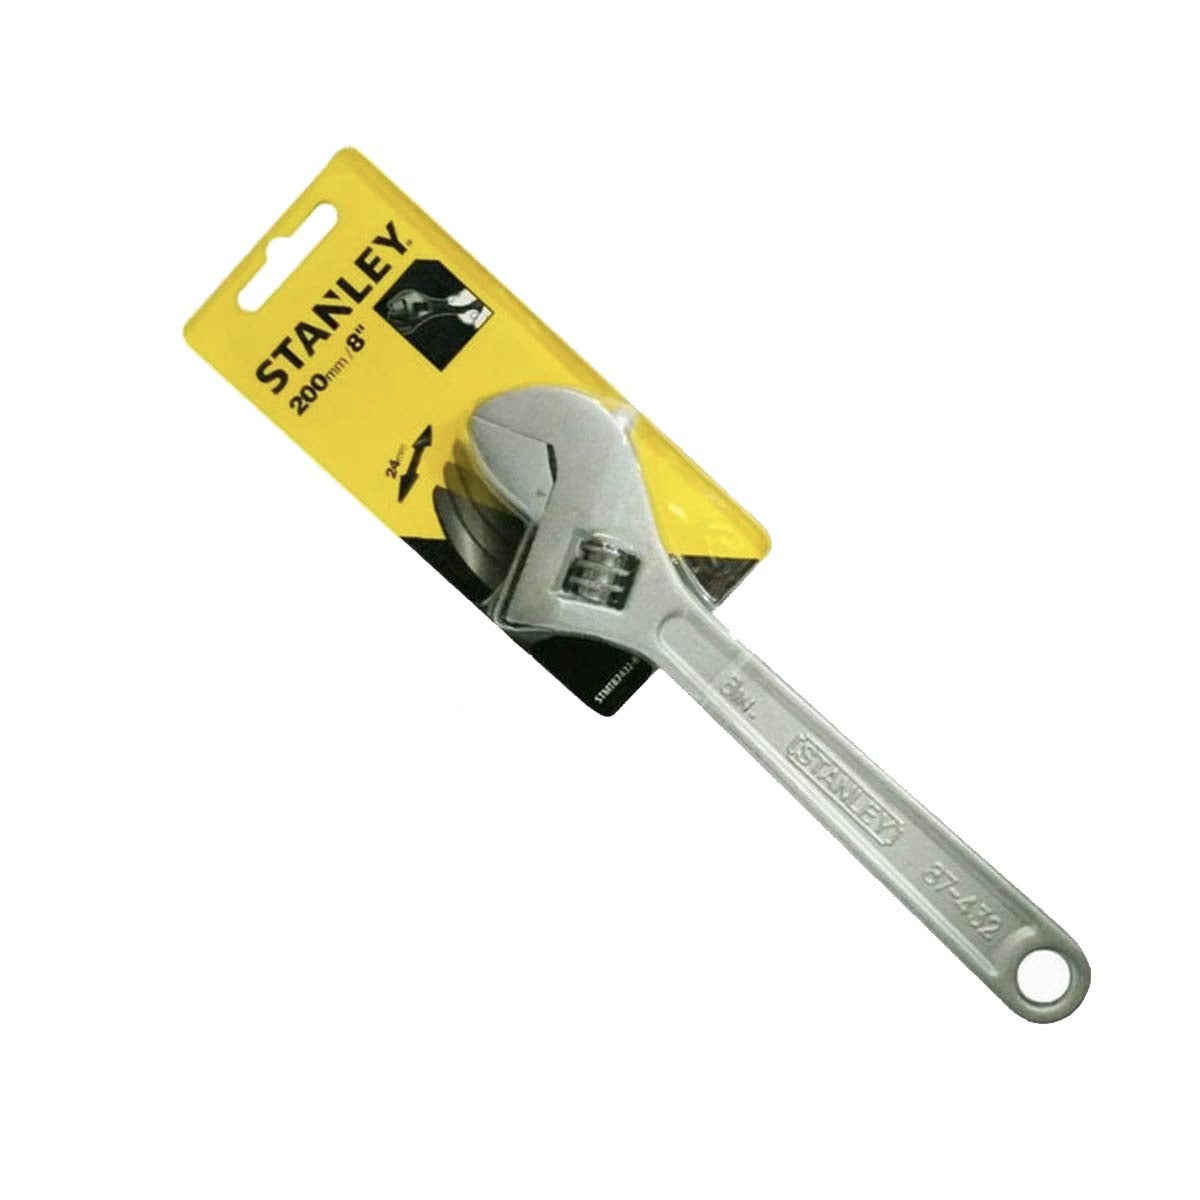 Stanley Adjustable Wrench 8"